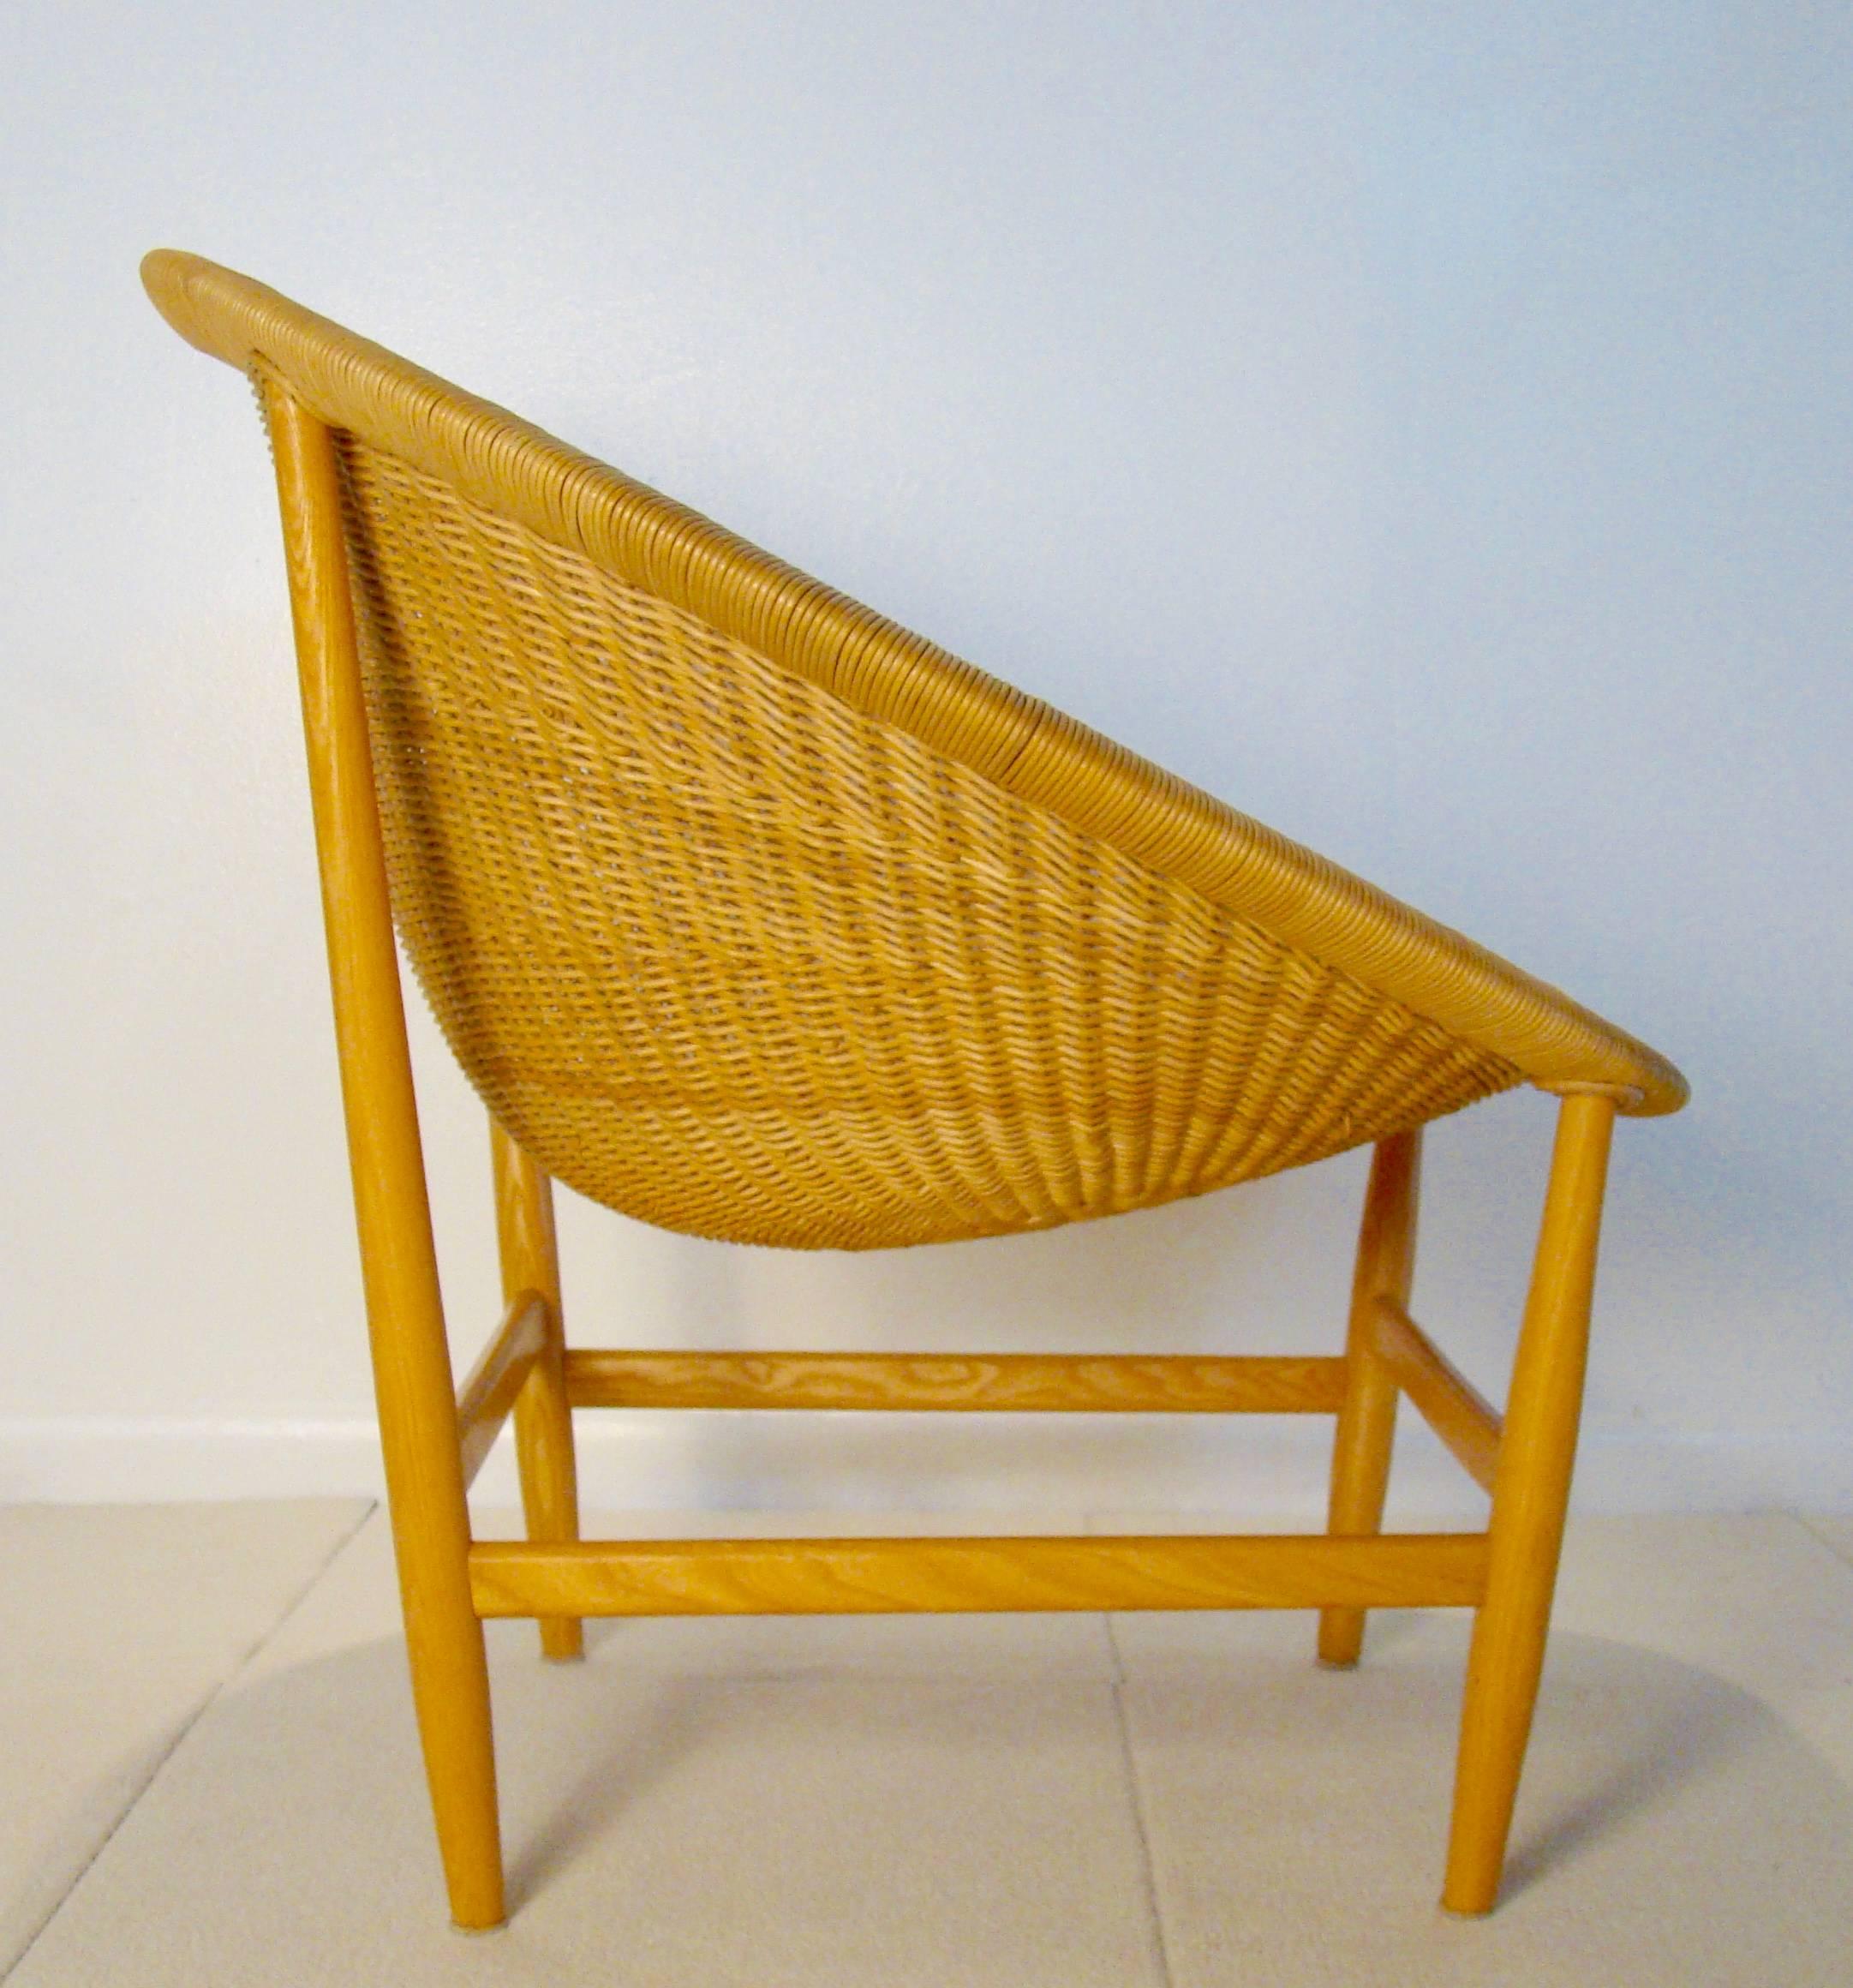 Beautiful wicker basket lounge chair sometimes referred to as the Pontoppidan chair. A wood frame comprised of birch wood slips into the wicker chair piece supported by stretchers. Comfortable and scuptural. Simple and understated.